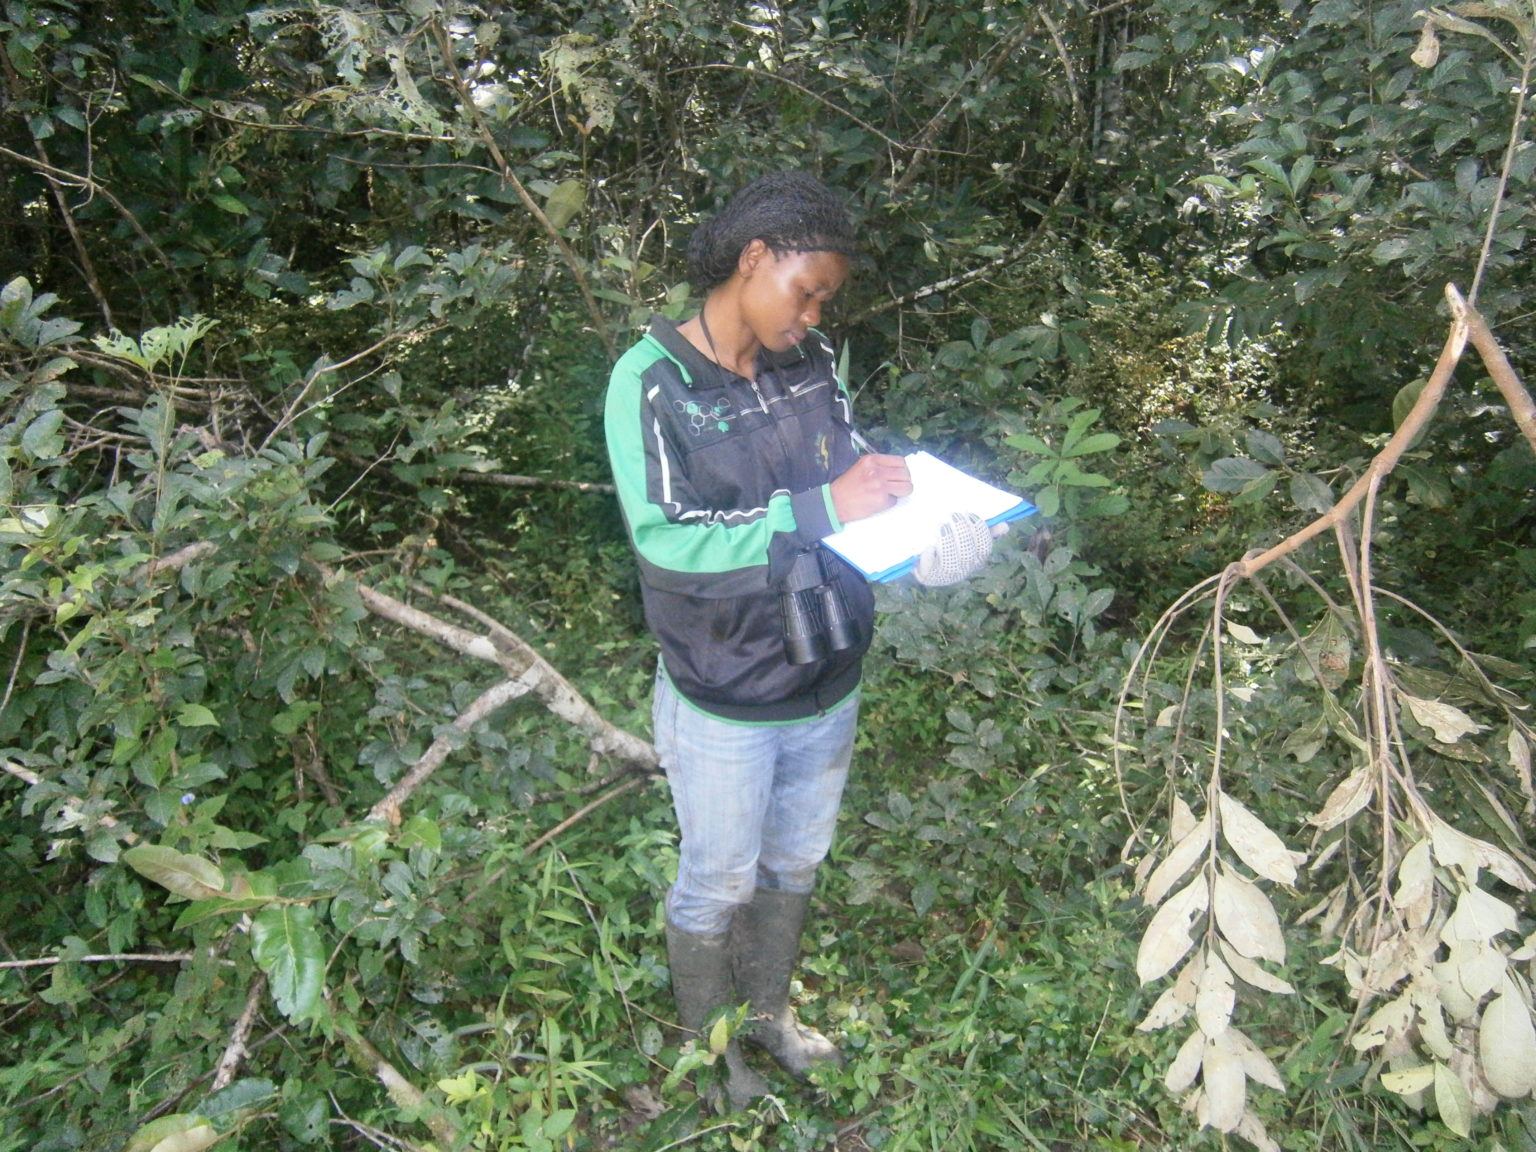 Florence Aghomo doing research in the field. (Photo courtesy of Florence Aghomo)